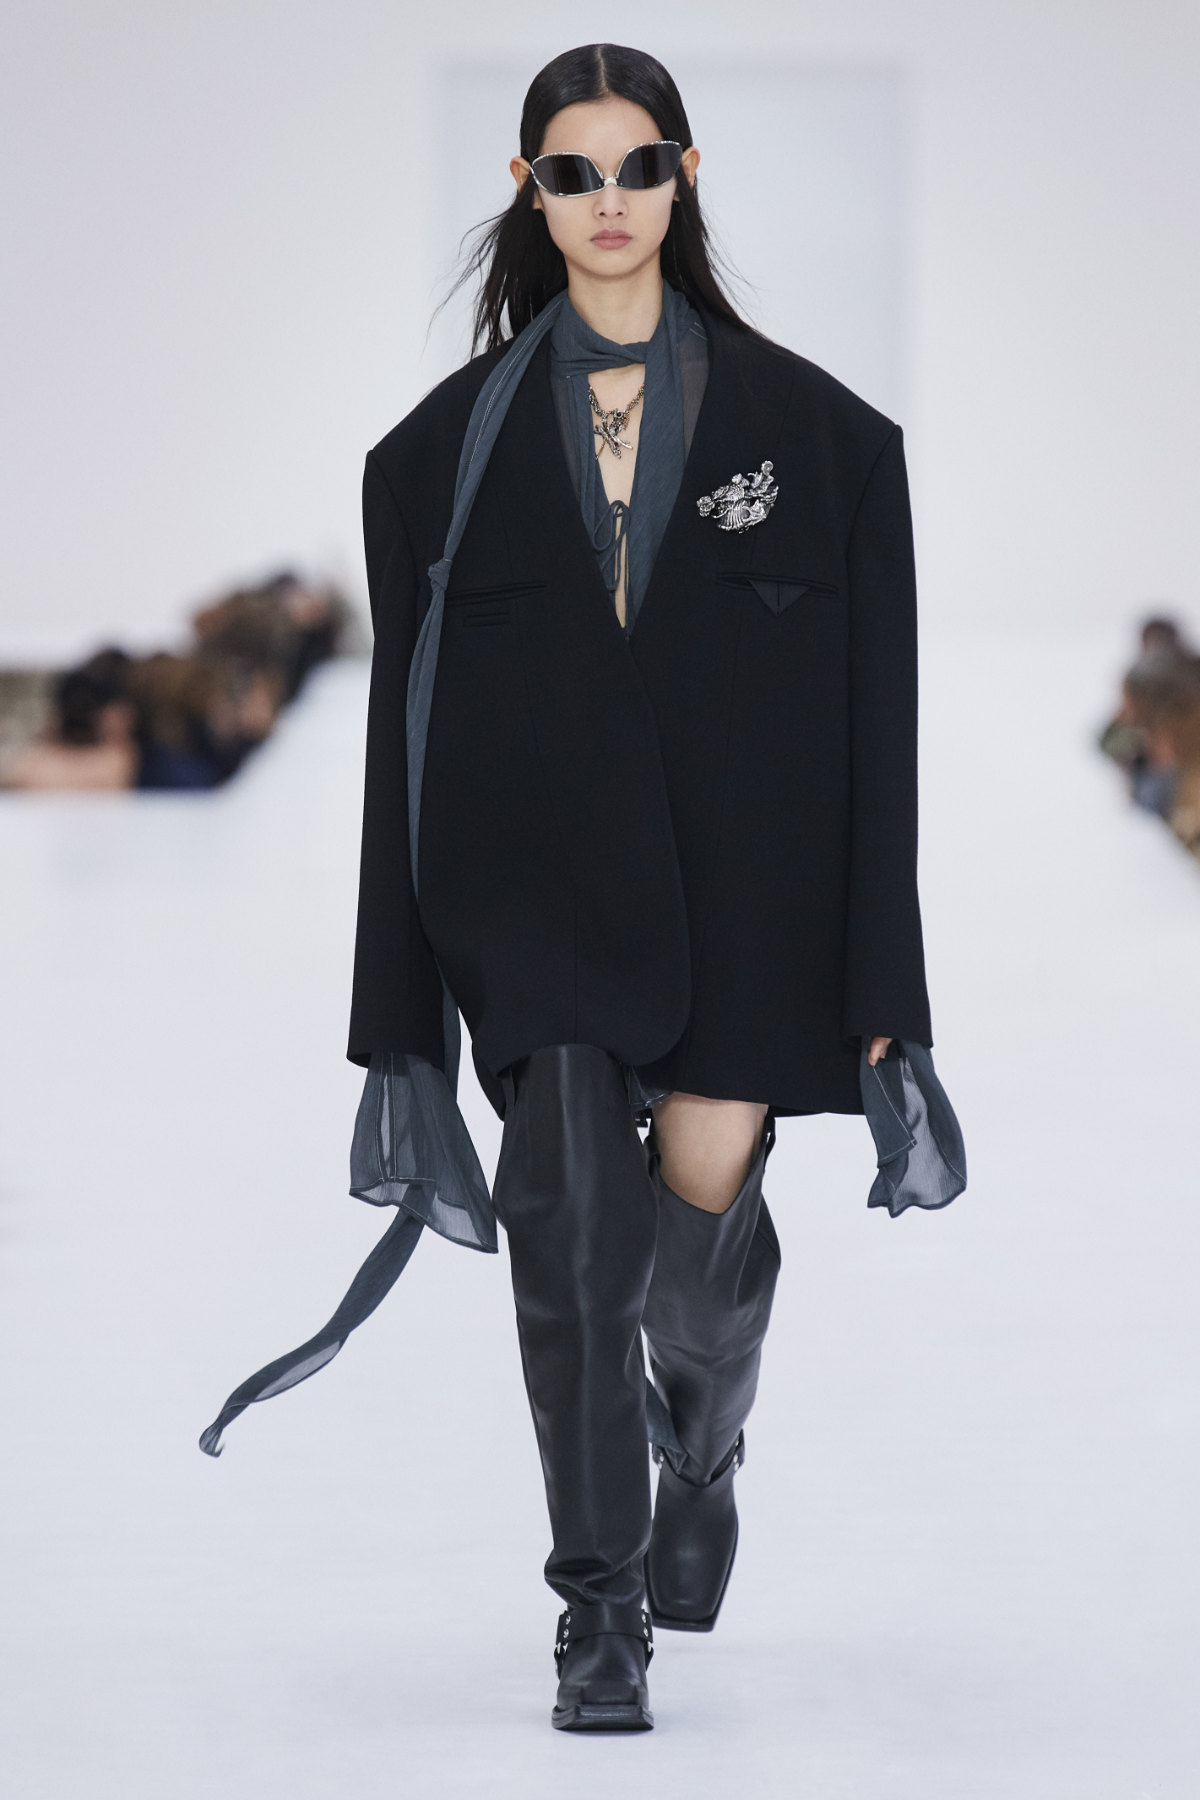 Acne Studios Presents Its New Women’s Fall W22 Collection